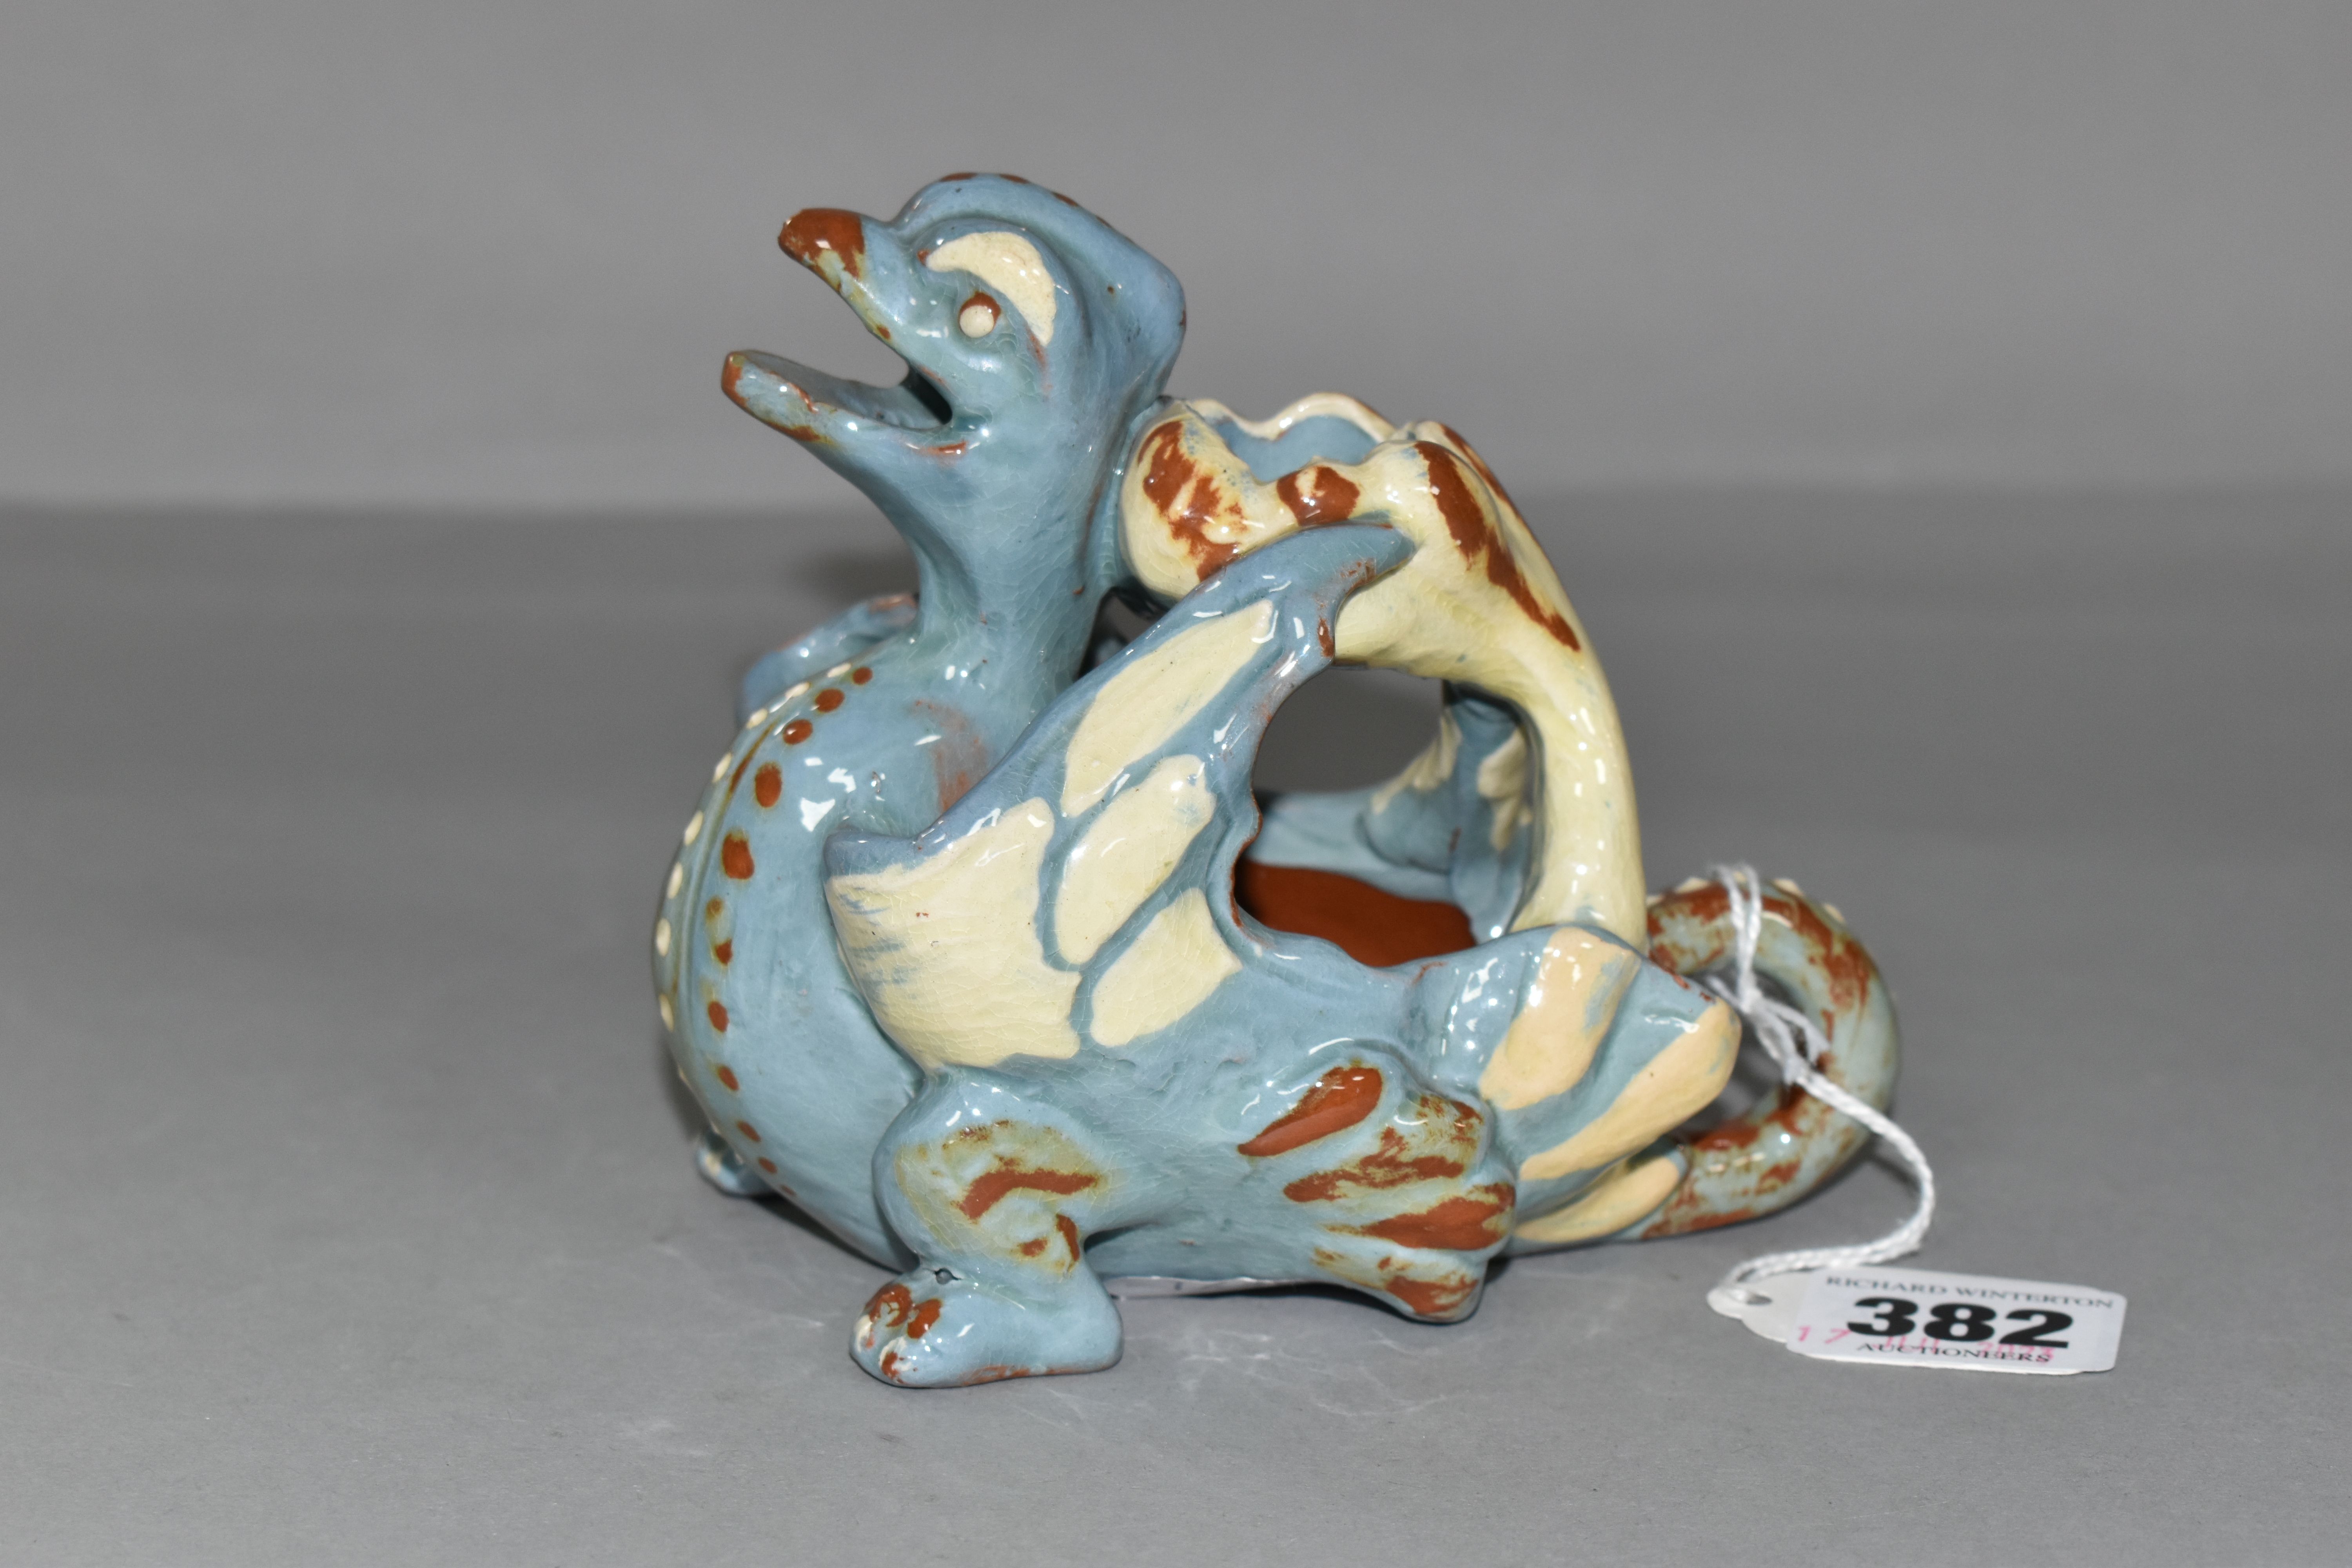 A C.H BRANNAN POTTERY 'GRIFFIN' CANDLE/SPILL HOLDER, incised CH Brannam, Barum, dated 1894, slip